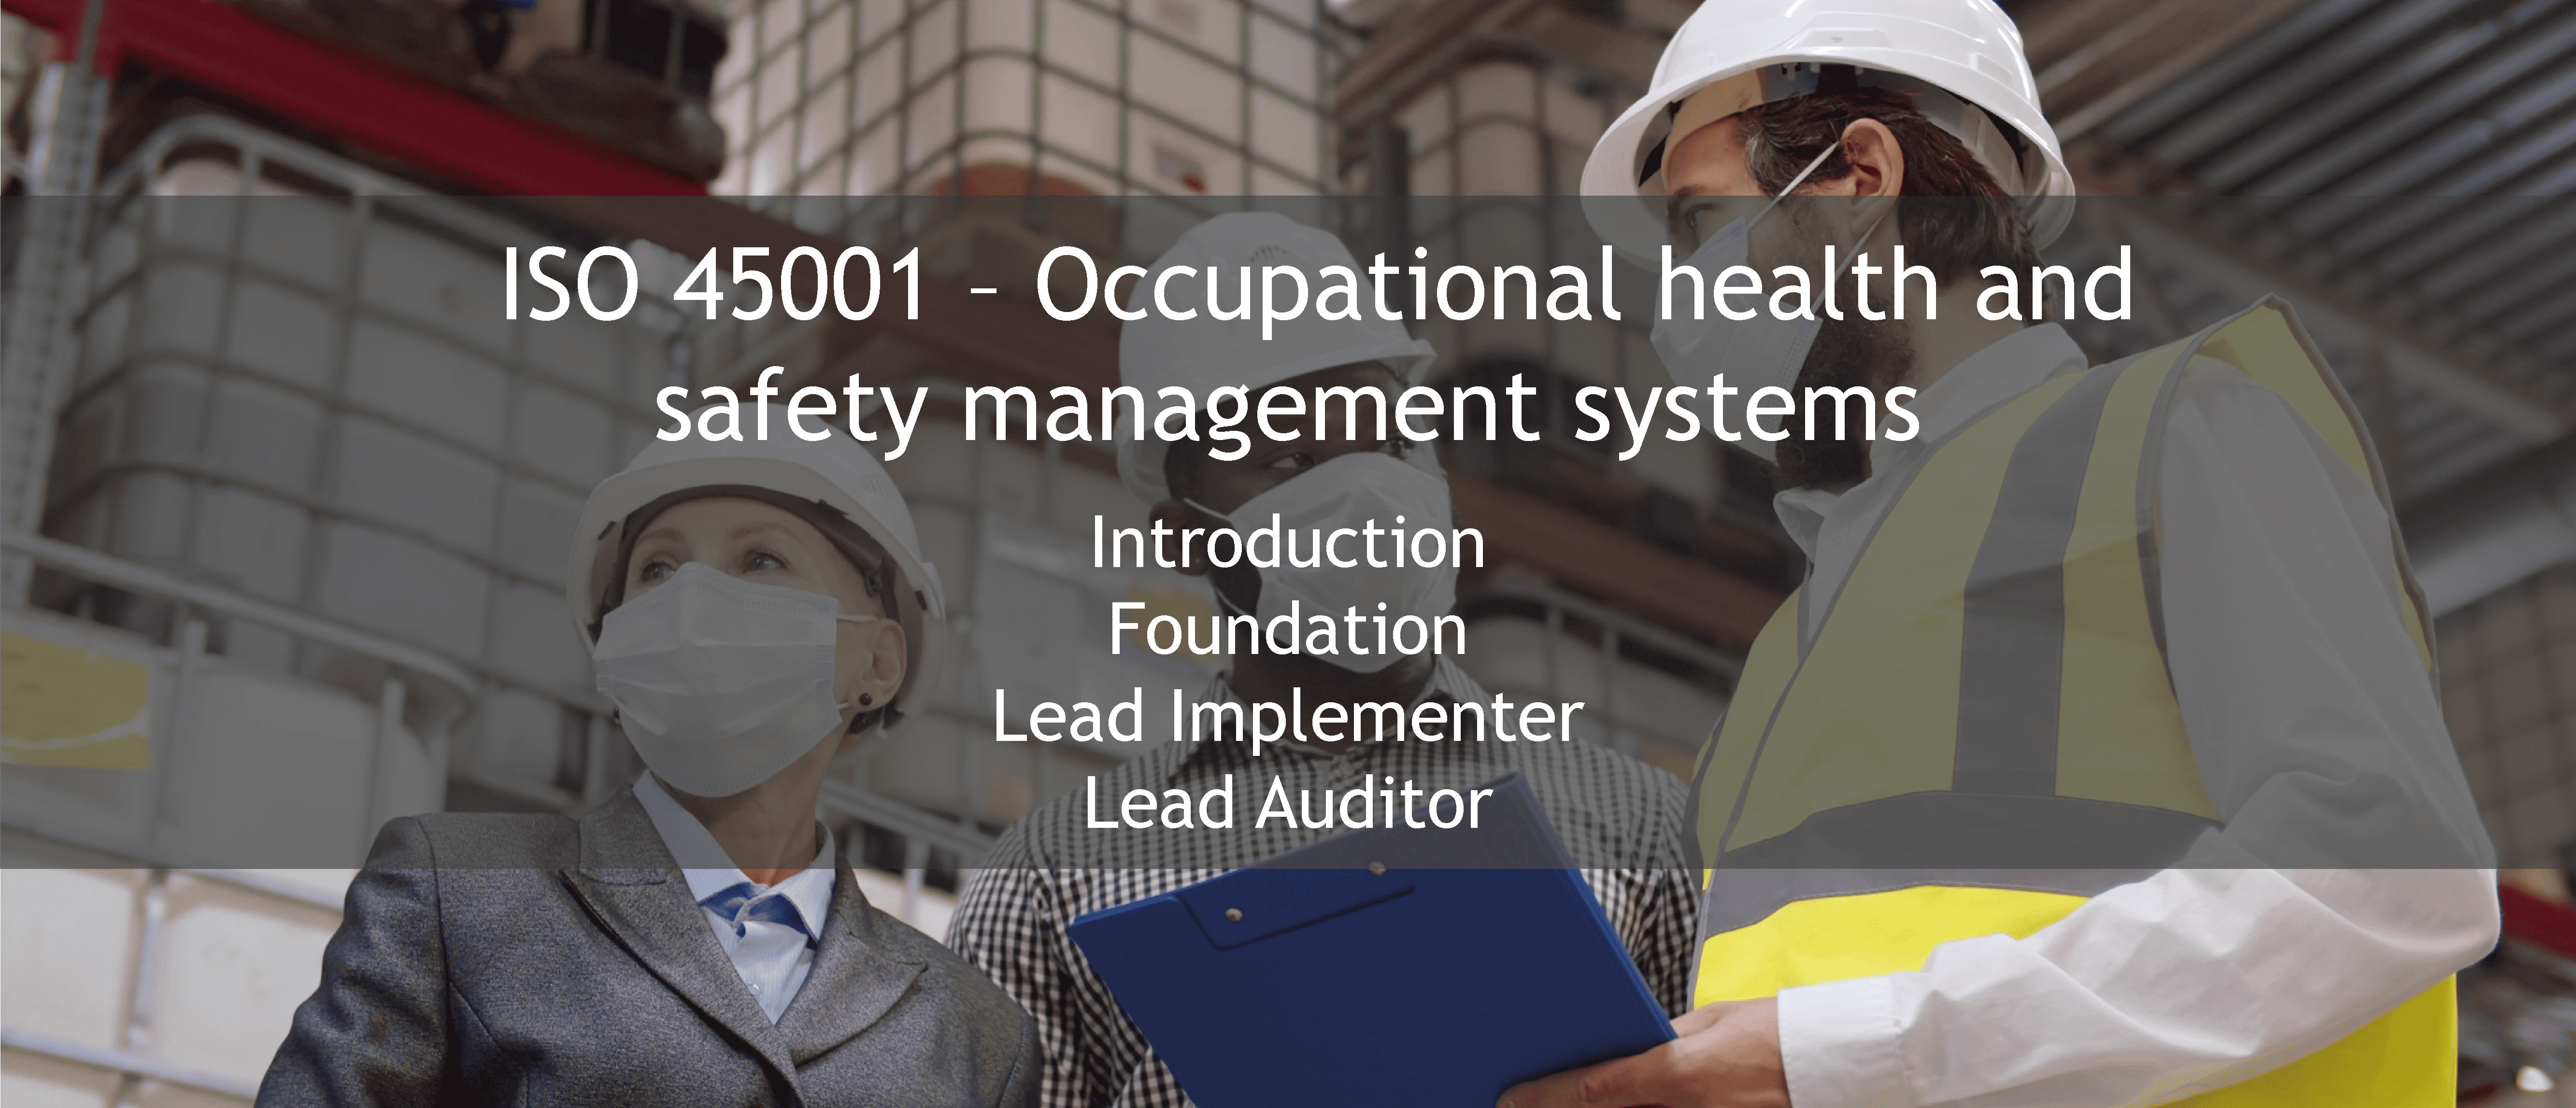 ISO 45001 training offer - ISO 14001 - Environmental management systems